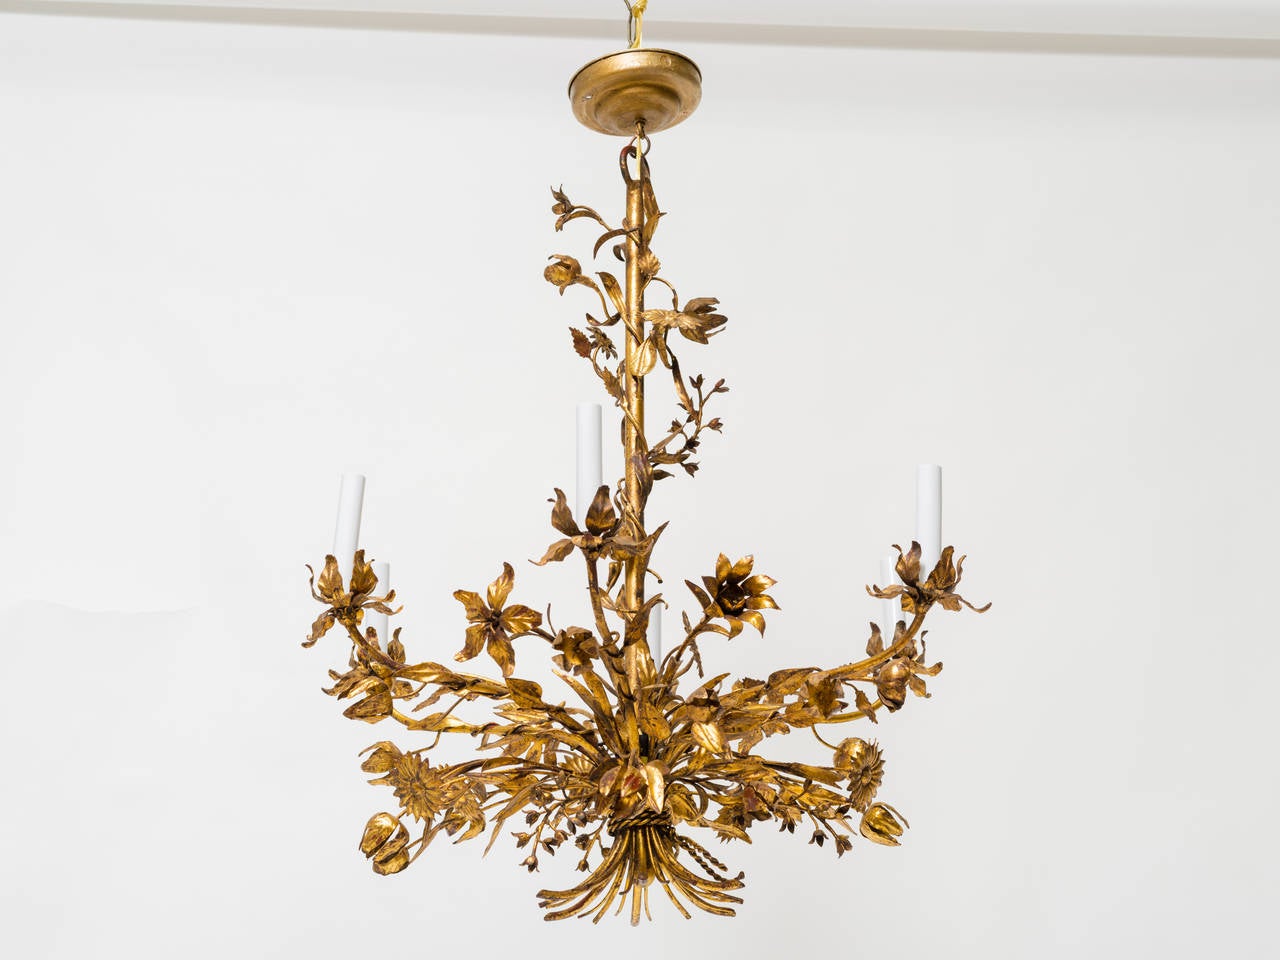 Remarkable 1950's gilt metal chandelier. Great variety of leaves and flowers.
Professionally restored and rewired.